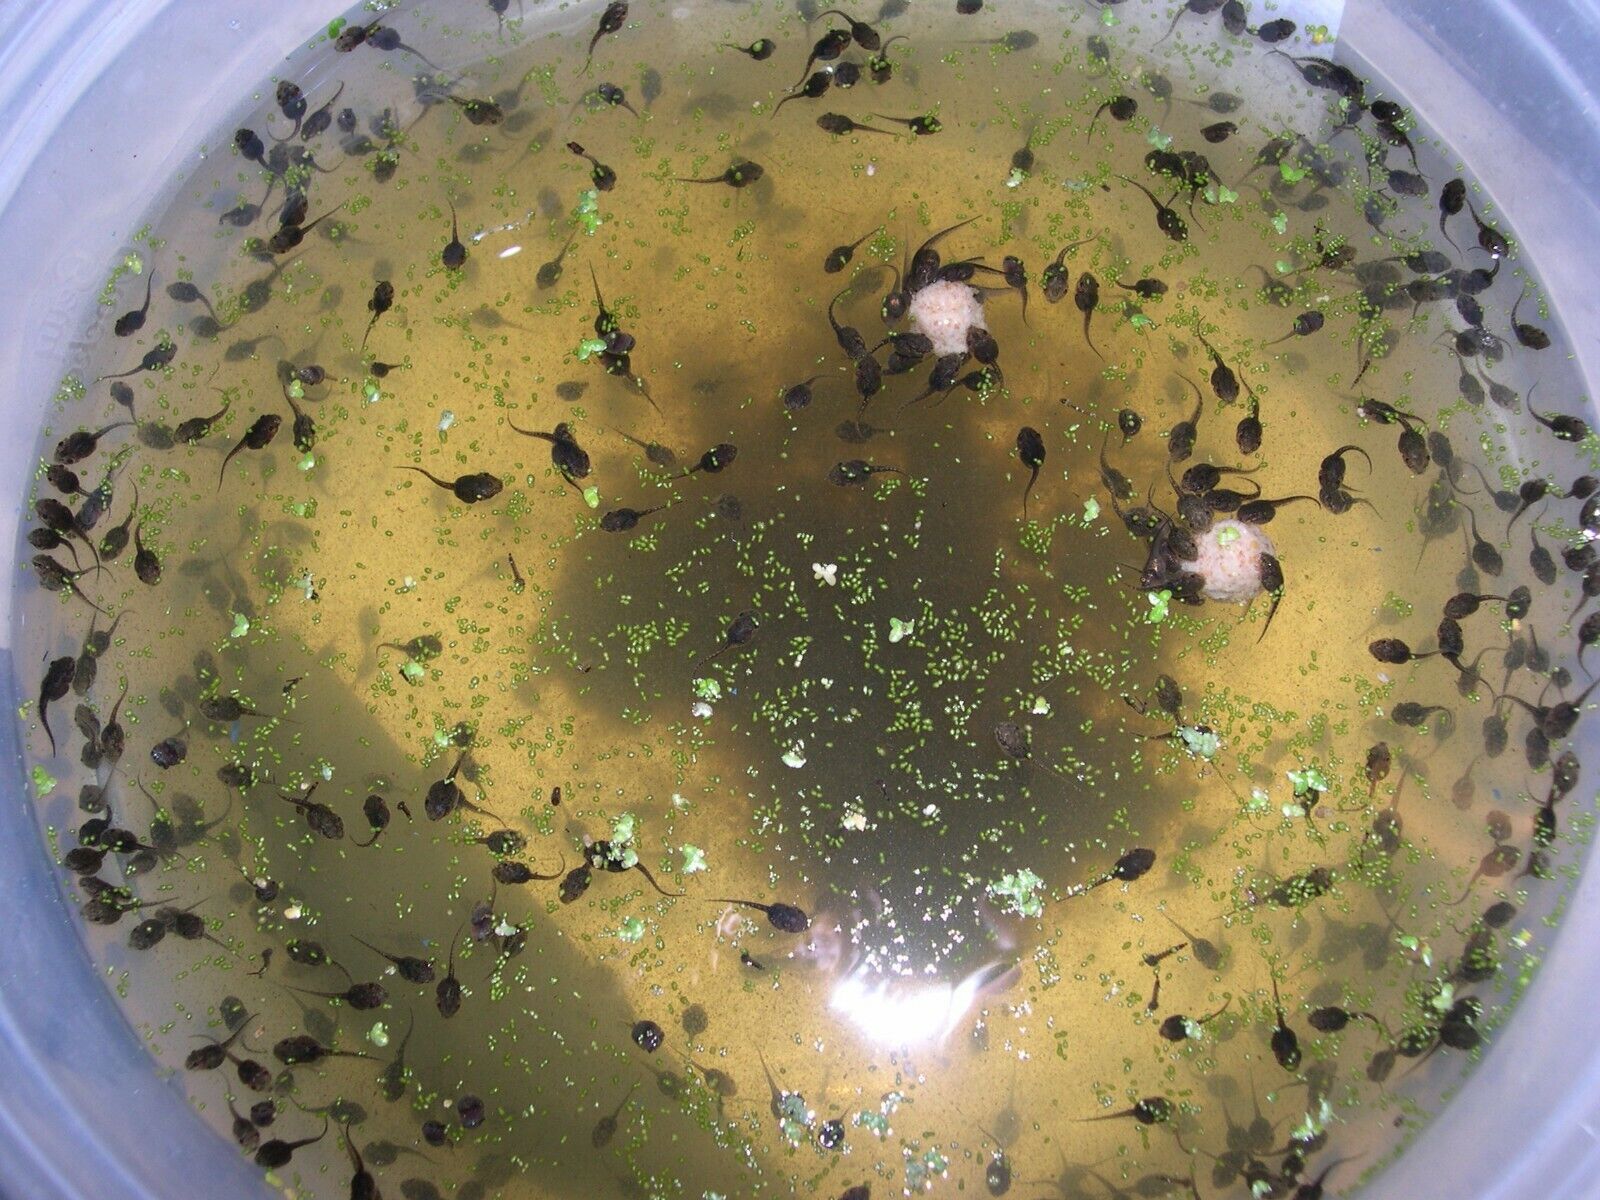 22 Live Tiny Tree frog Tadpoles free tad food and plants for the trip Без бренда